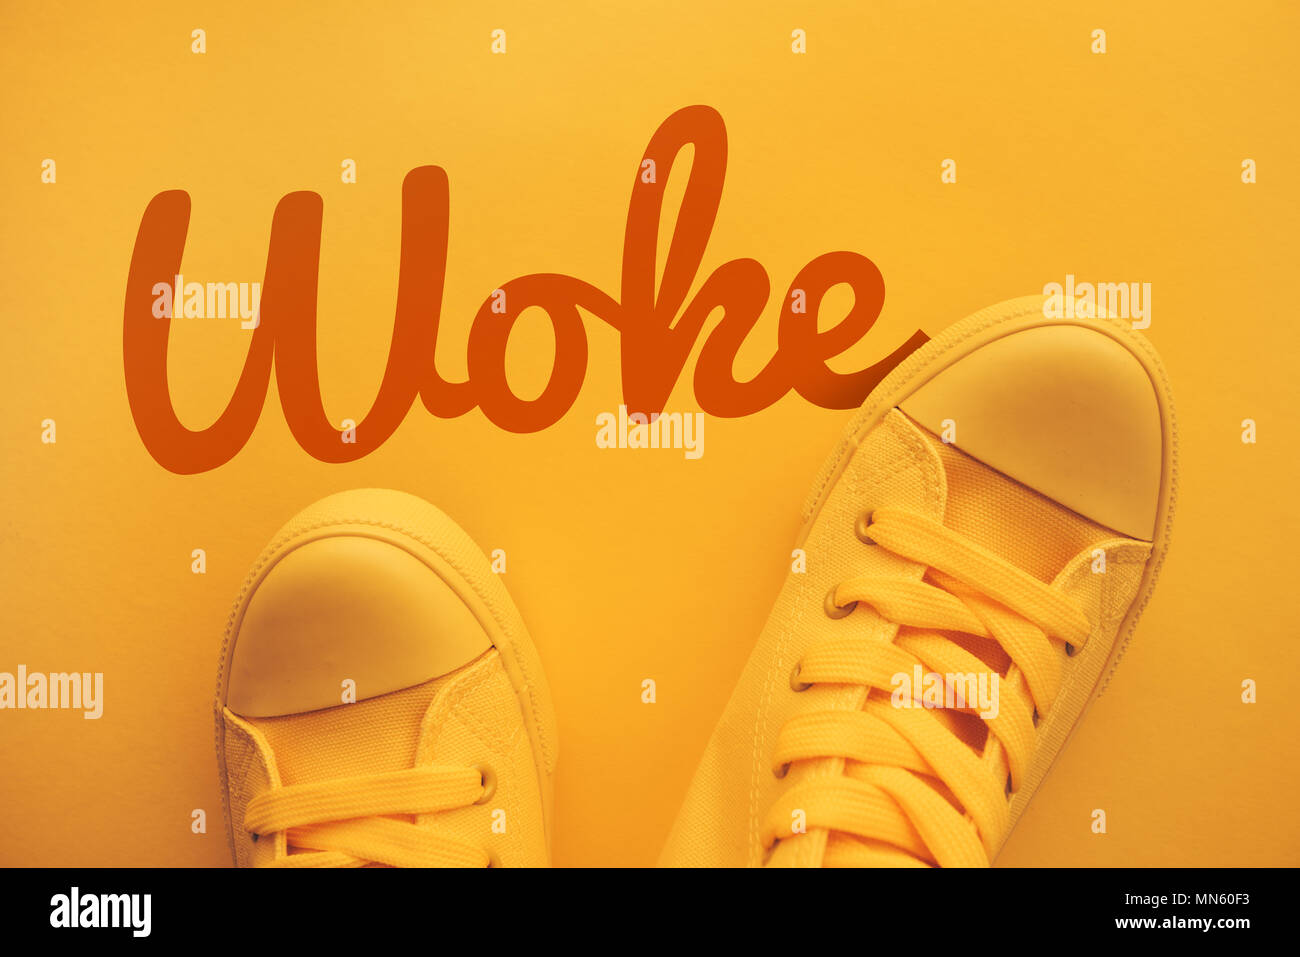 Words and phrases millennials use, conceptual image with young person in yellow sneakers standing directly above text - Woke Stock Photo